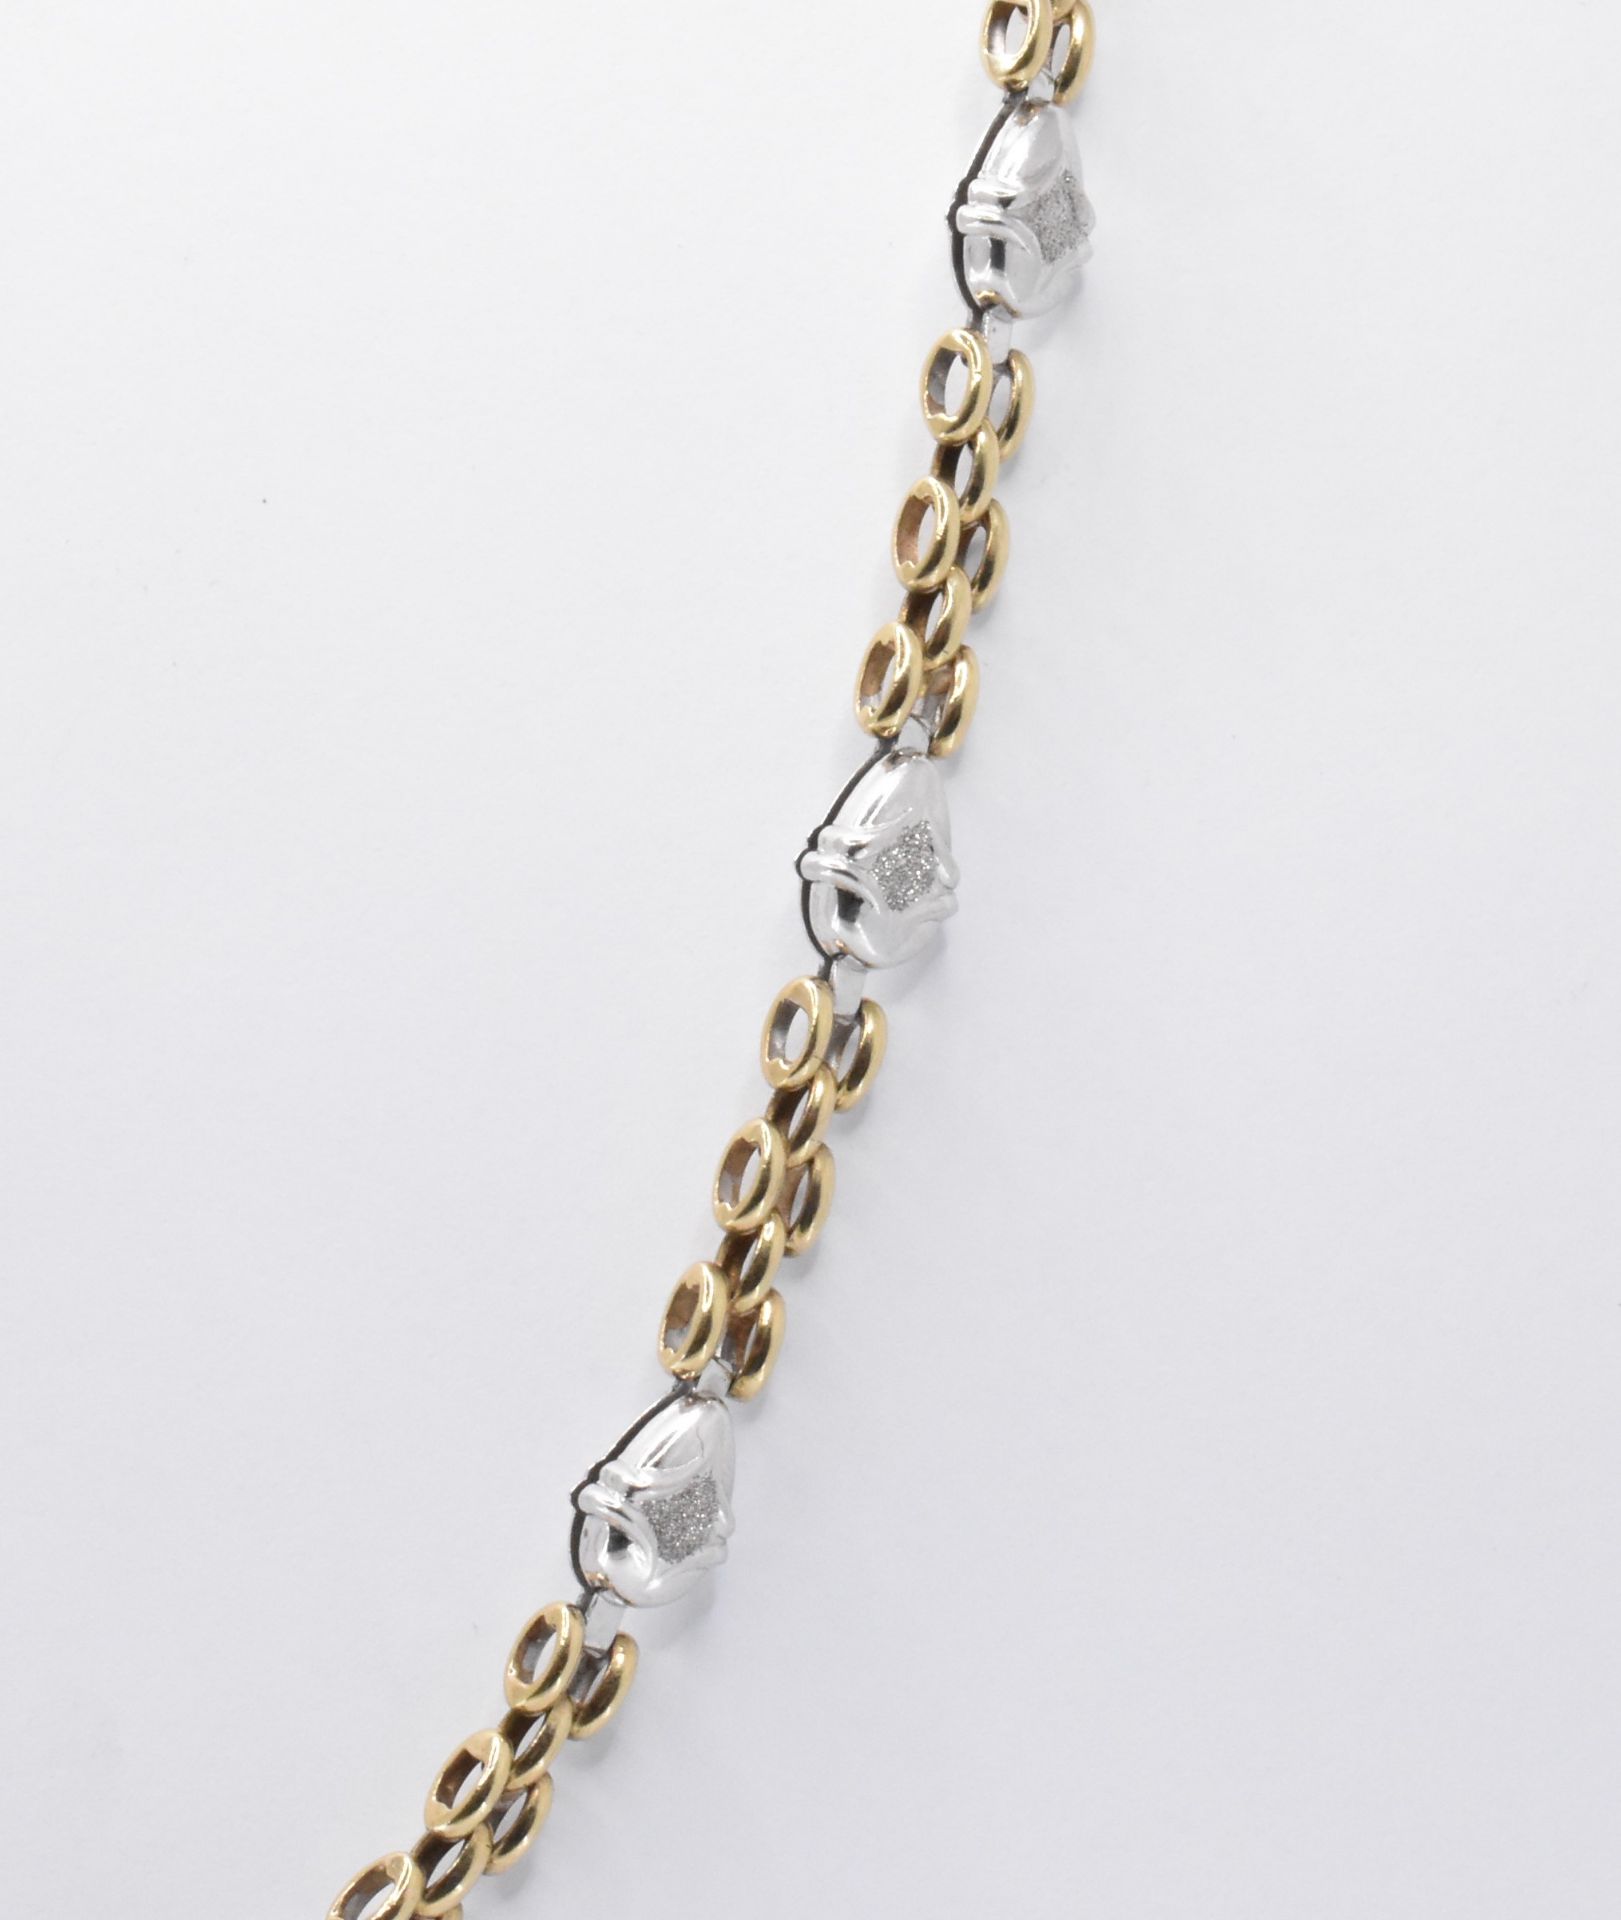 HALLMARKED 9CT GOLD TWO TONE FANCY LINK CHAIN NECKLACE - Image 3 of 5